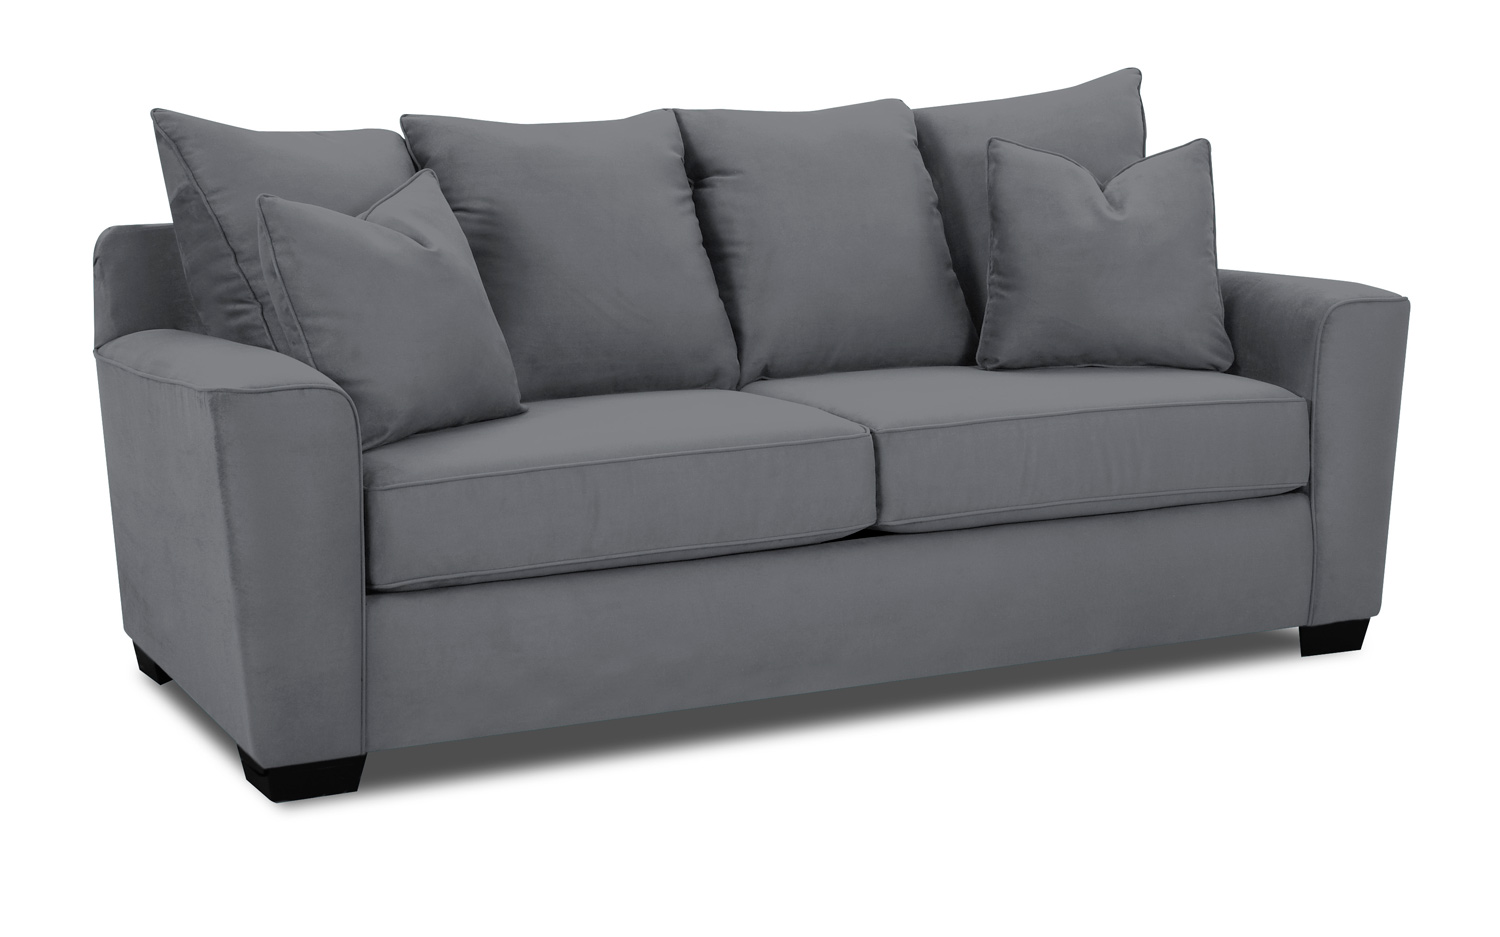 Klaussner Heather Sofa - Microsuede Charcoal